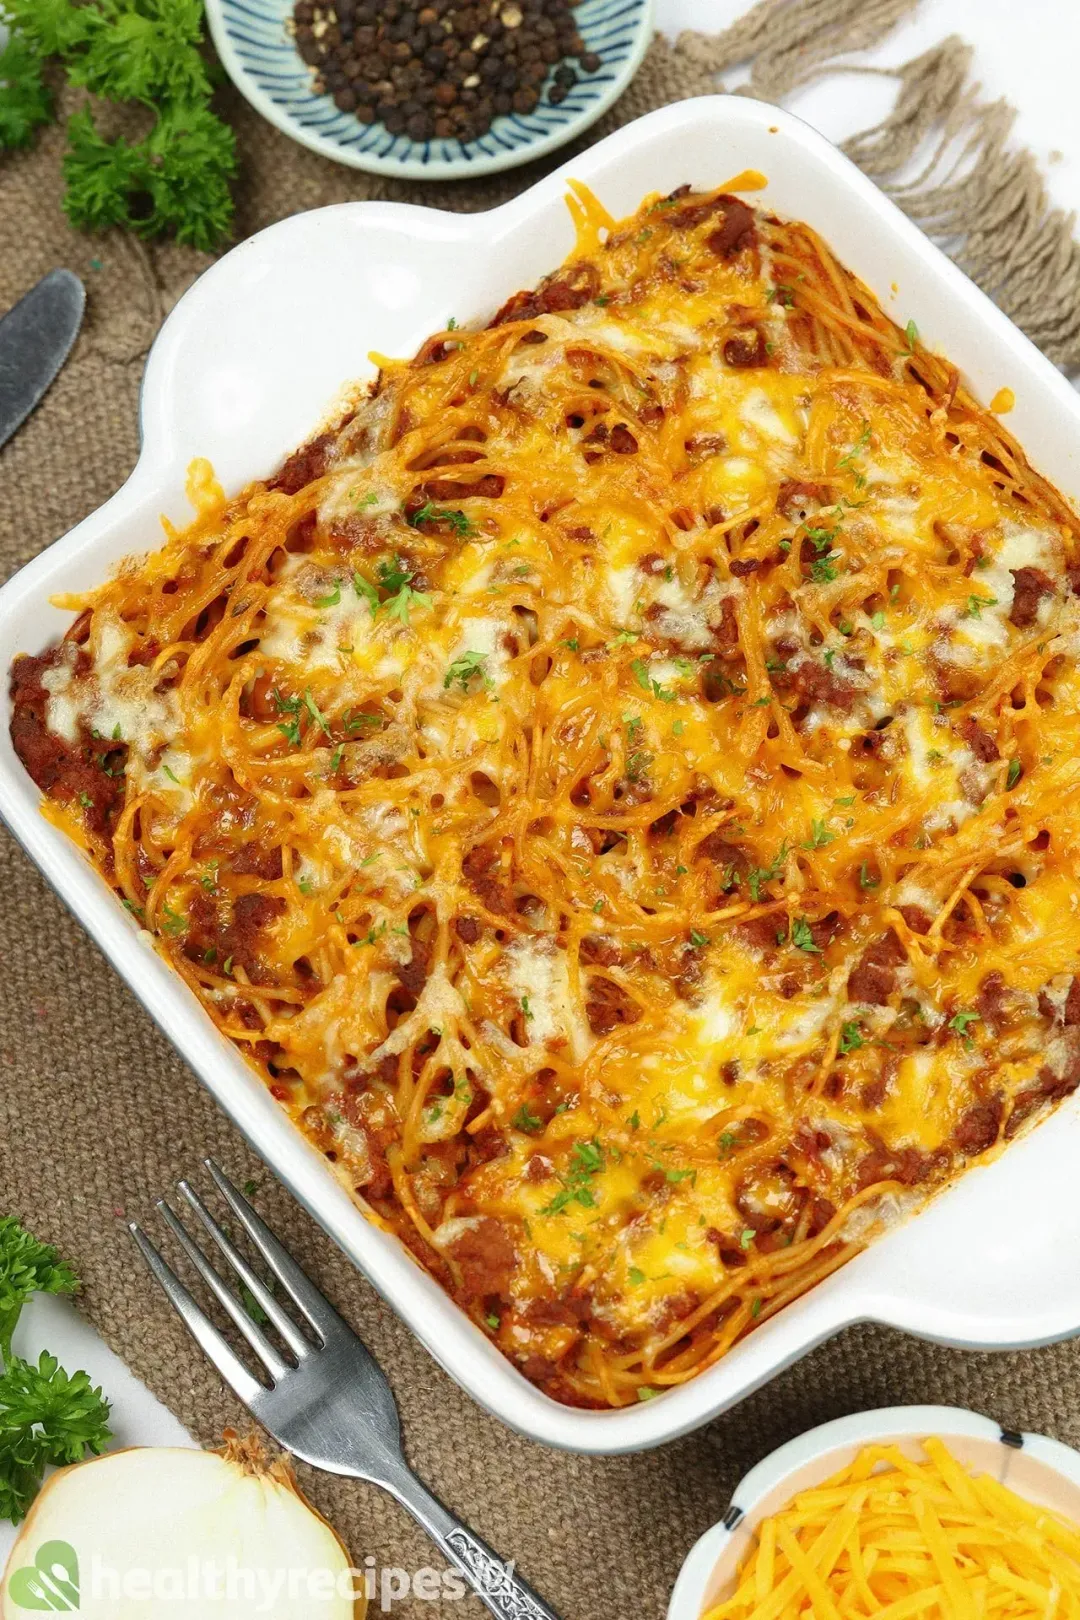 is Baked Spaghetti Healthy